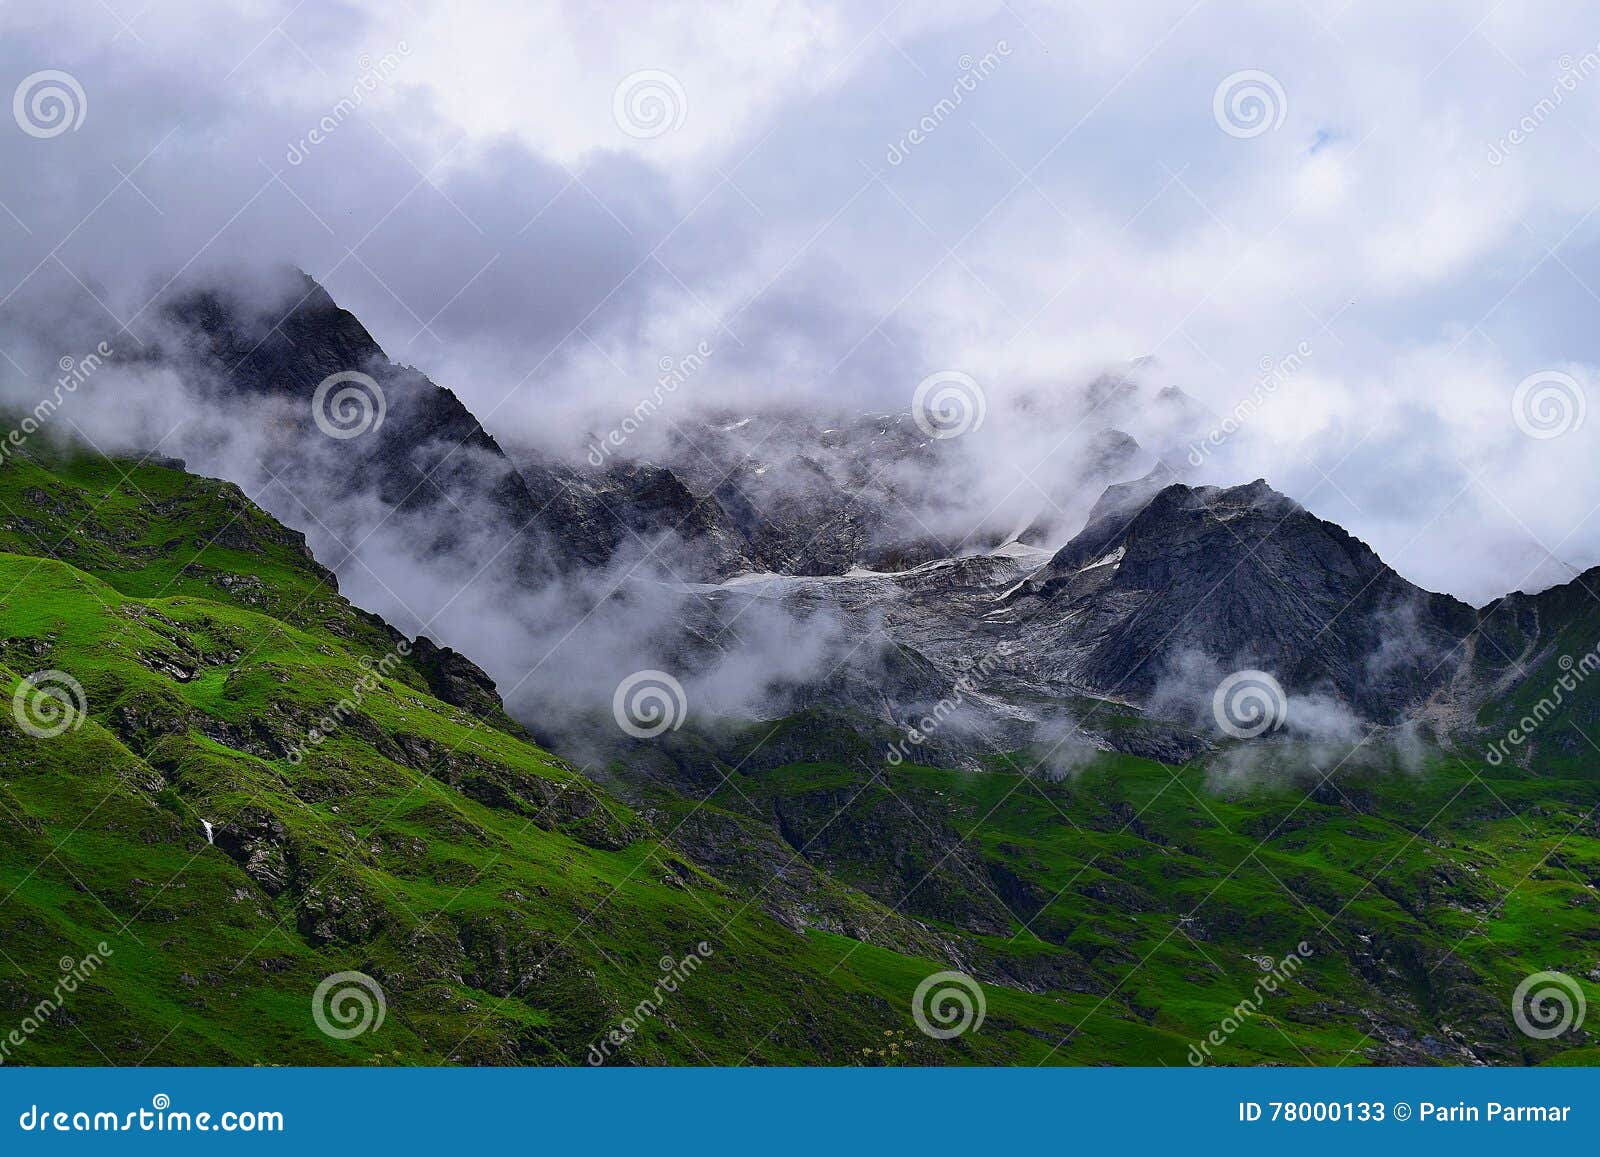 snow-laden peaks of himalayan mountains at valley of flowers national park, uttarakhand, india